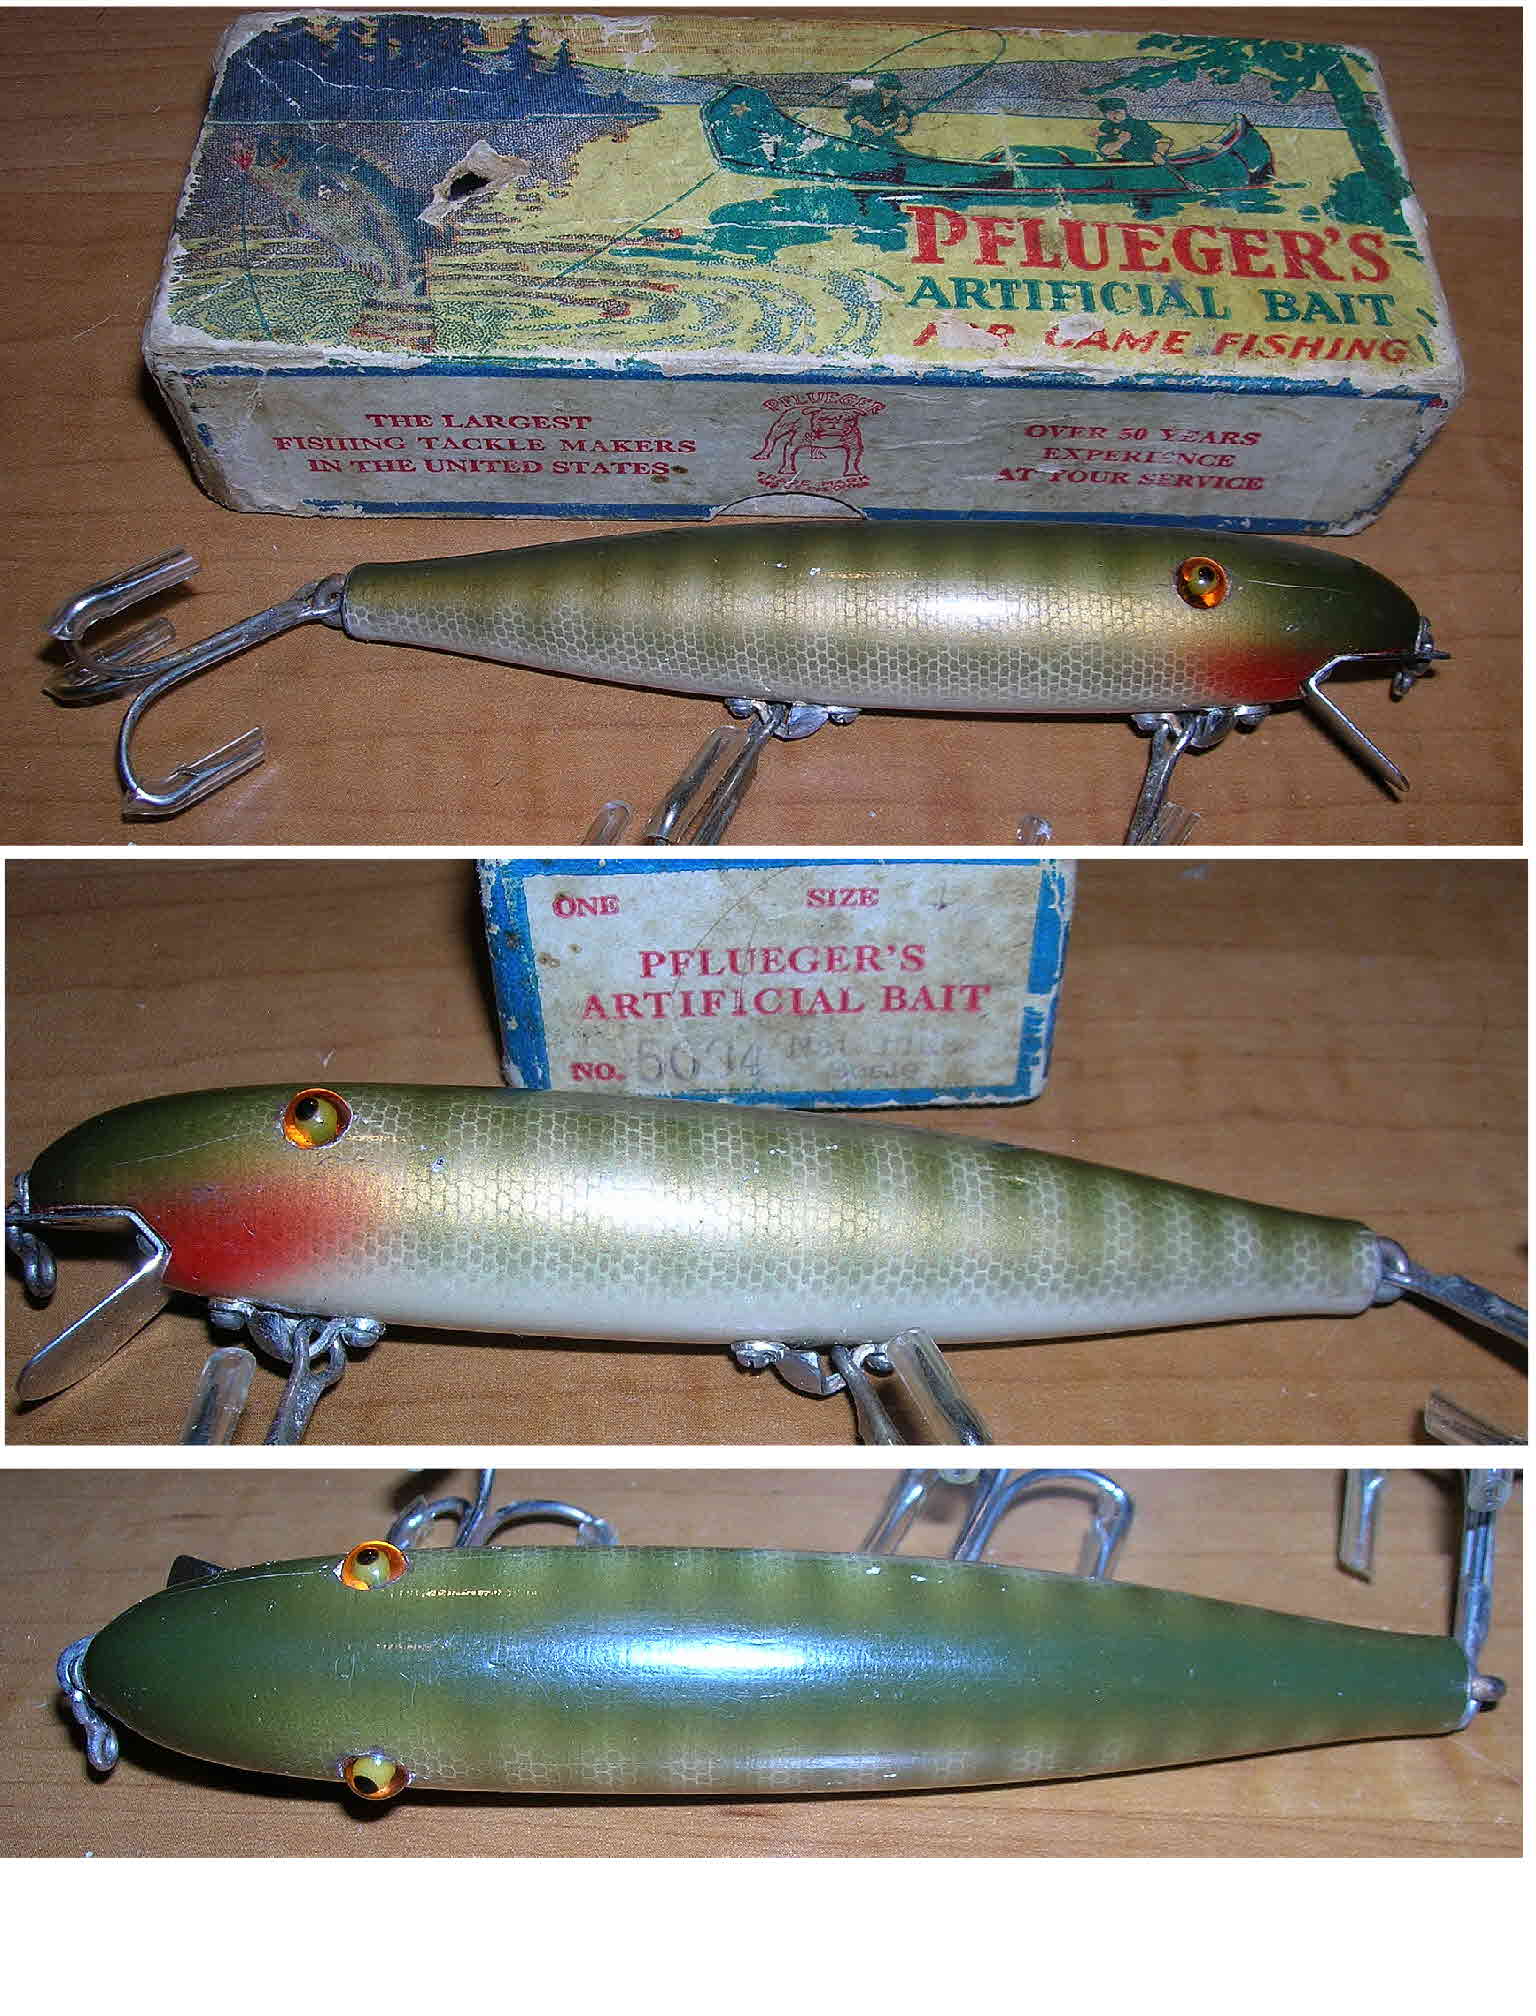 Vintage Lures - 'Pal-O-Mine' by Pflueger